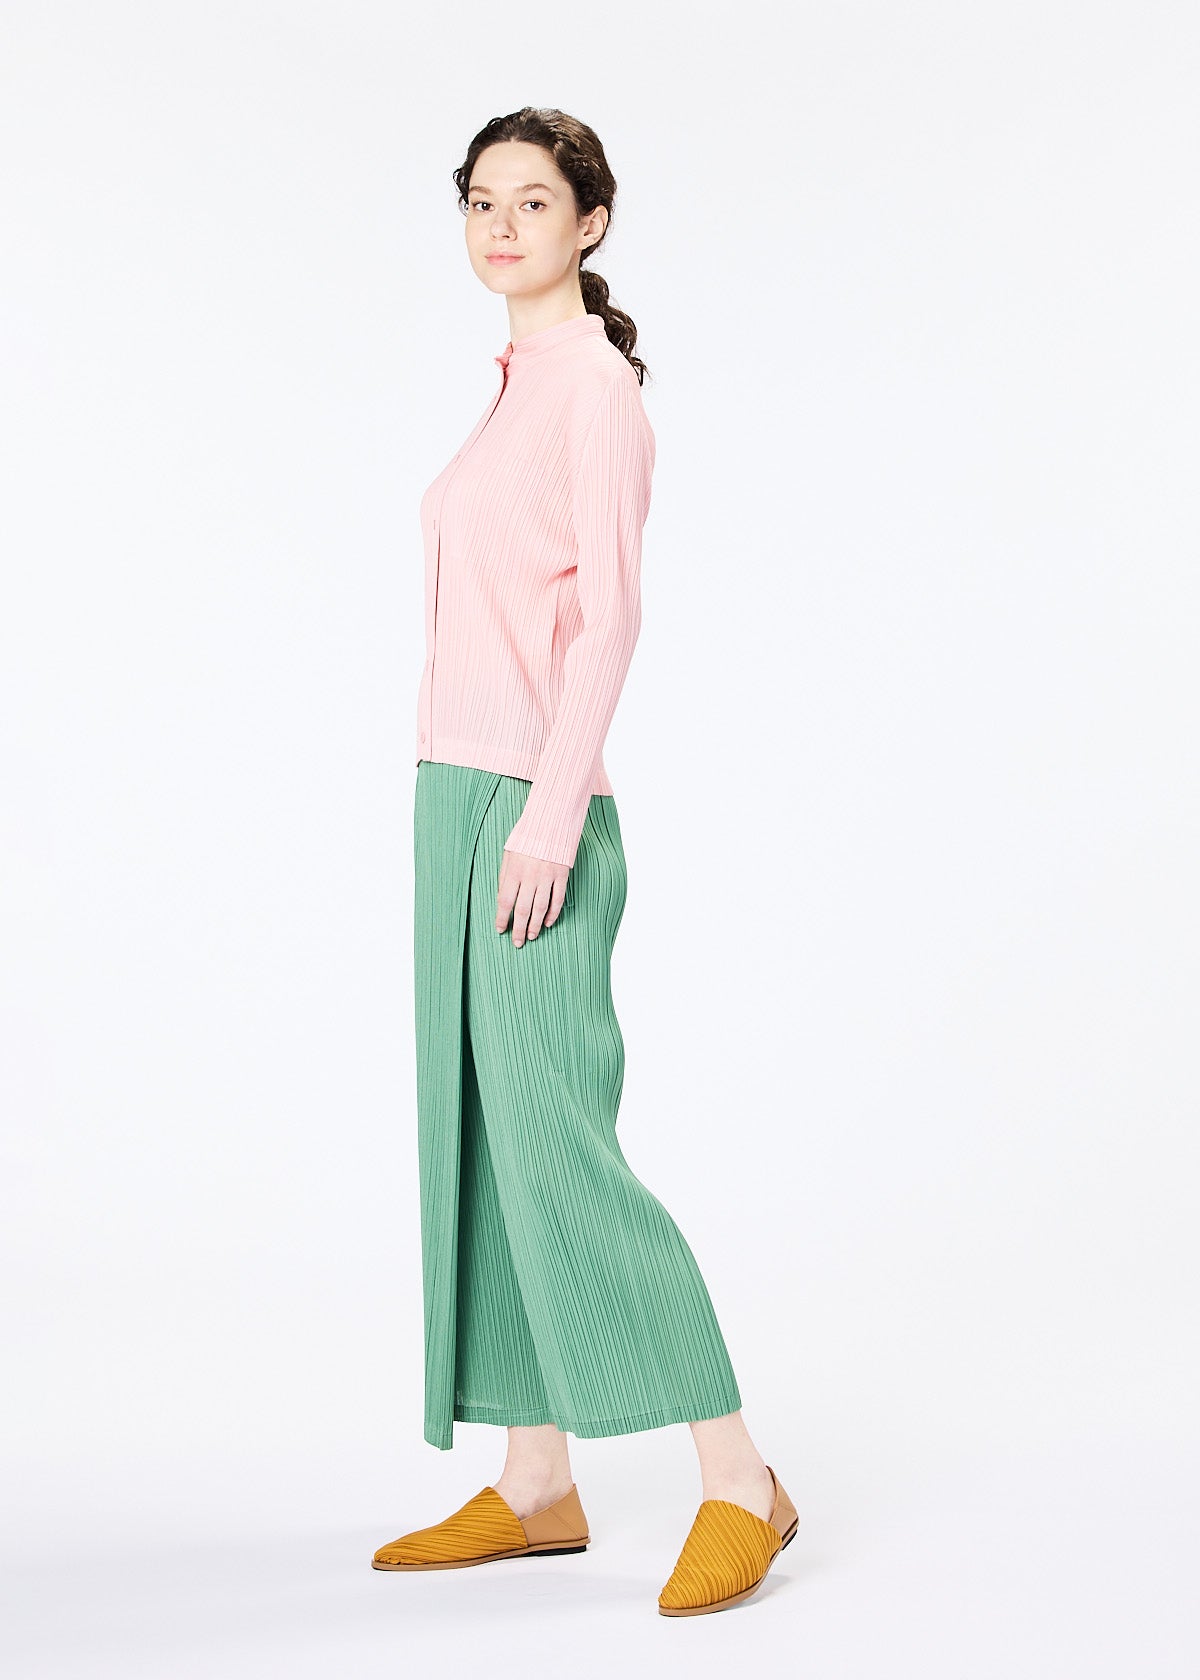 MONTHLY COLORS : FEBRUARY TOP | The official ISSEY MIYAKE ONLINE